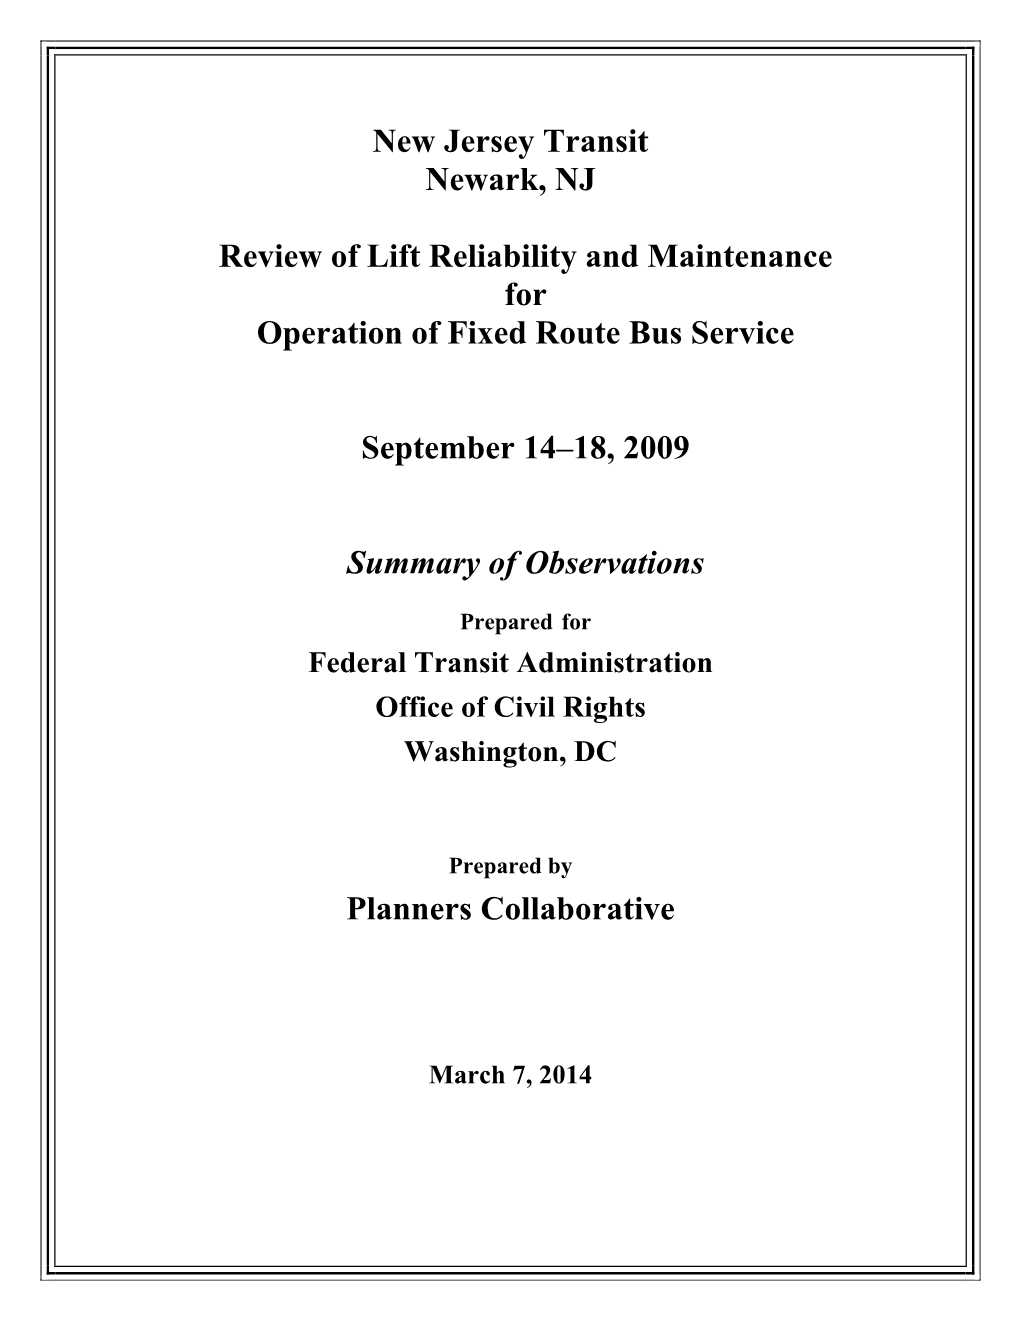 New Jersey Transit Review of Lift Reliability and Maintenance for Operation of Fixed Route Bus Service September 2009